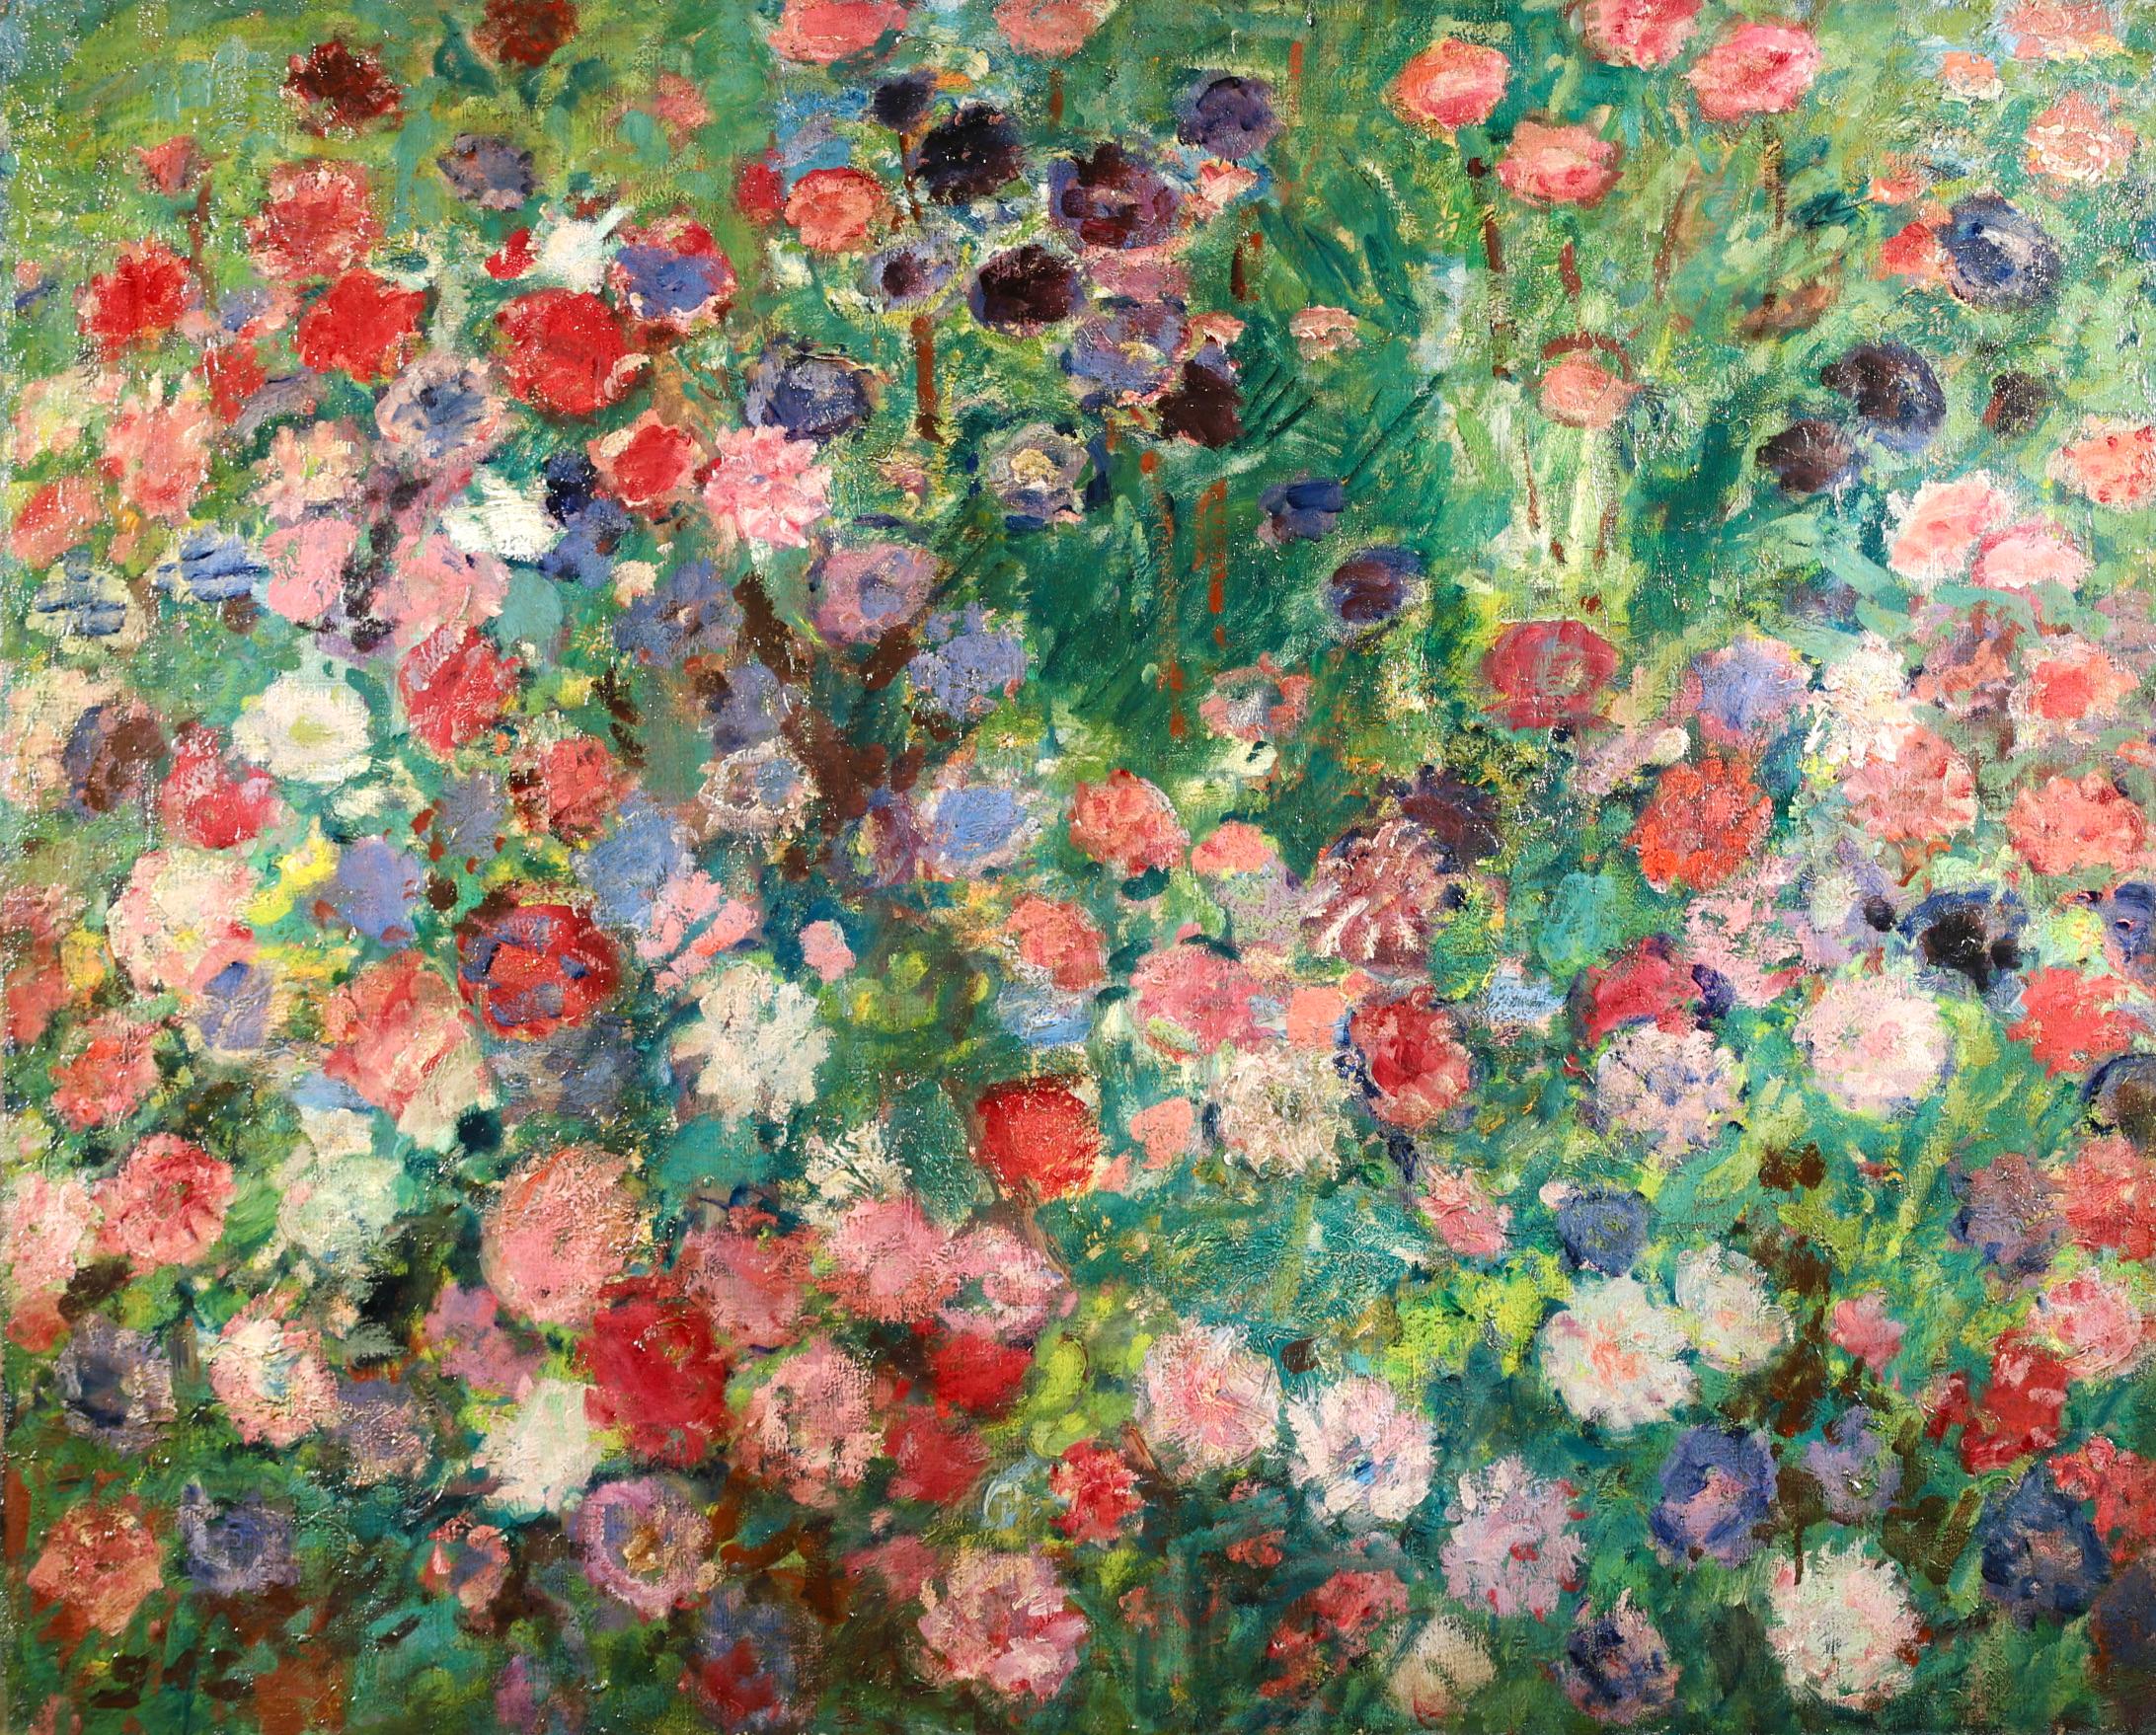 Stunning signed landscape oil on canvas circa 1920 by French post impressionist painter Georges D'Espagnat. This good-sized piece depicts garden filled with blue, red, pink and purple flowers. 

Signature:
Signed lower left

Dimensions:
Framed: